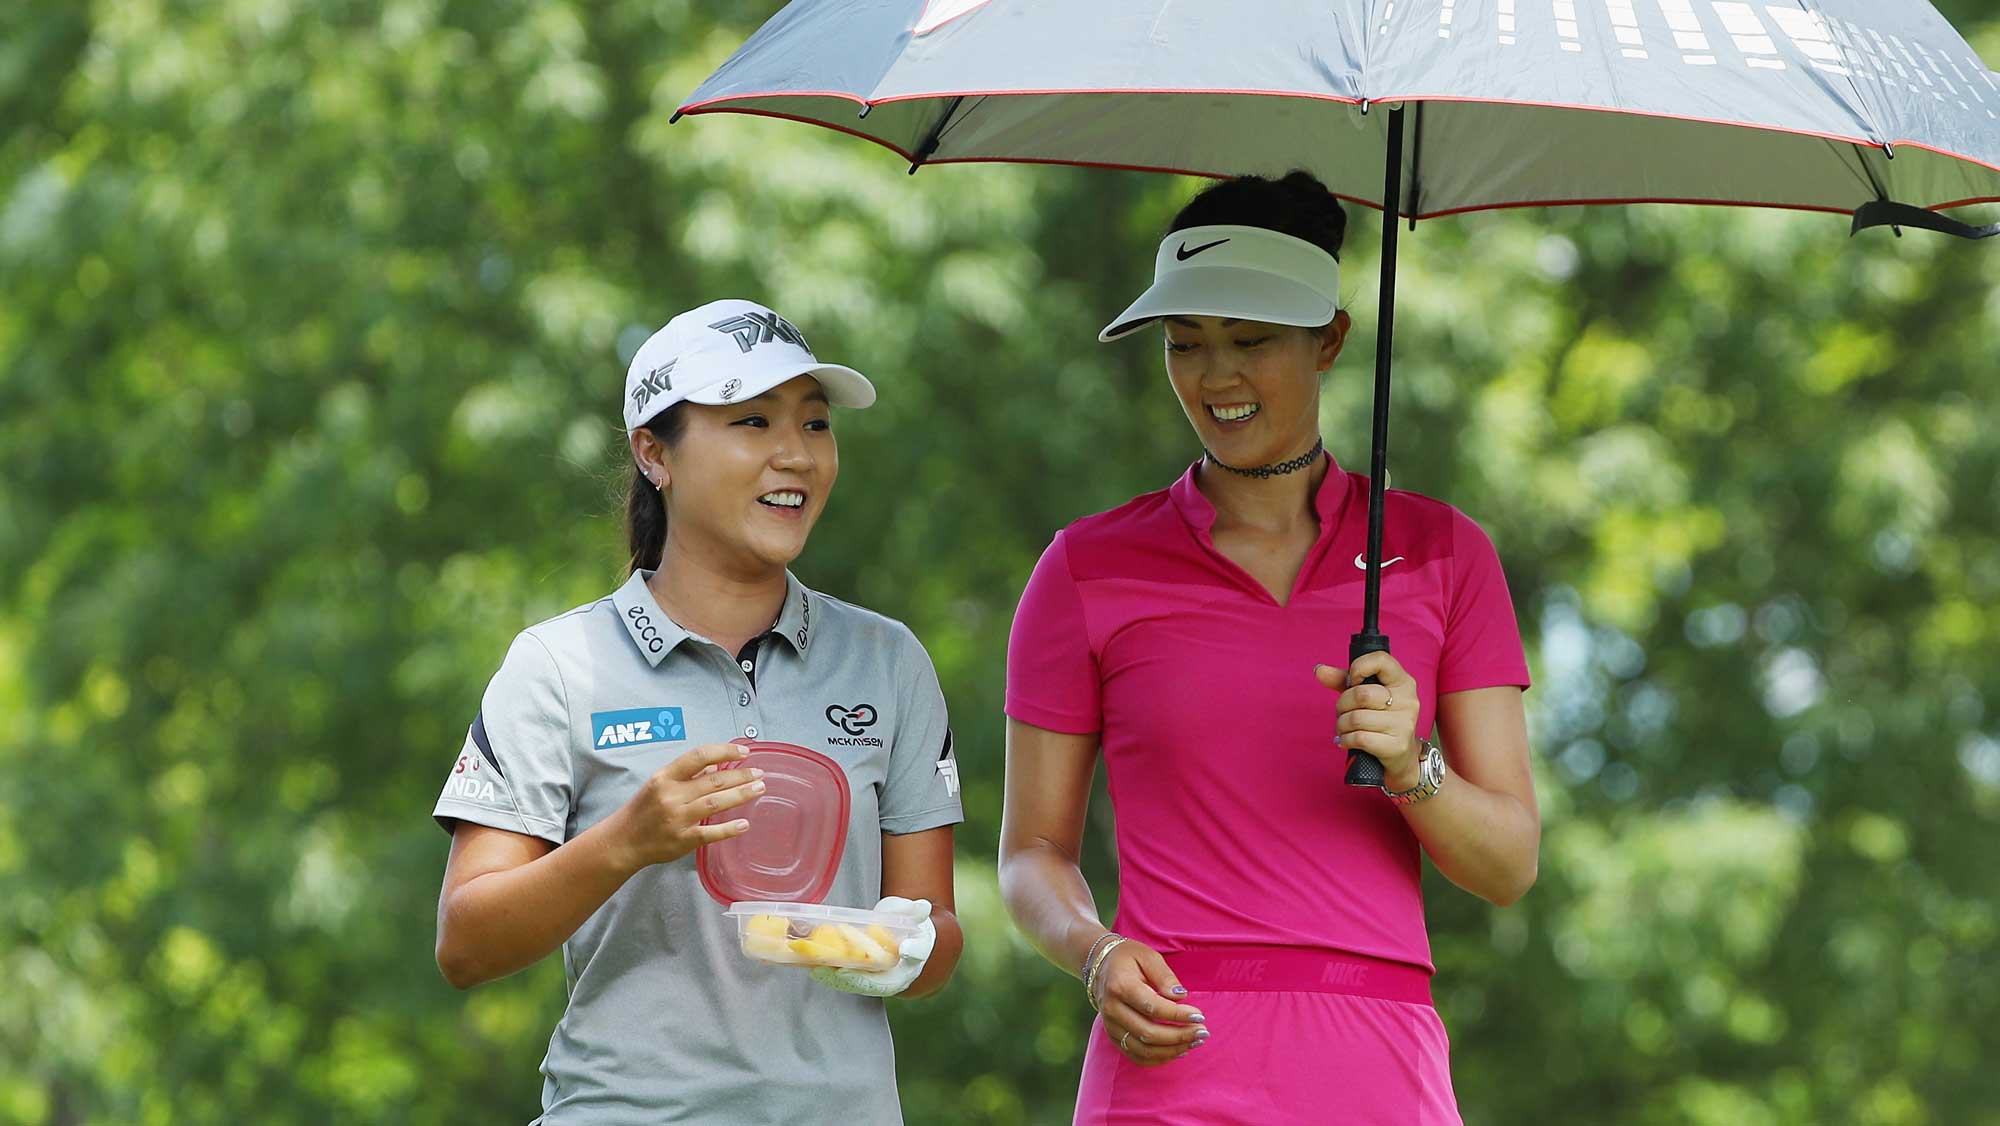 Michelle Wie and Lydia Ko of New Zealand wait together on the ninth hole during the third round of the 2017 KPMG Women's PGA Championship